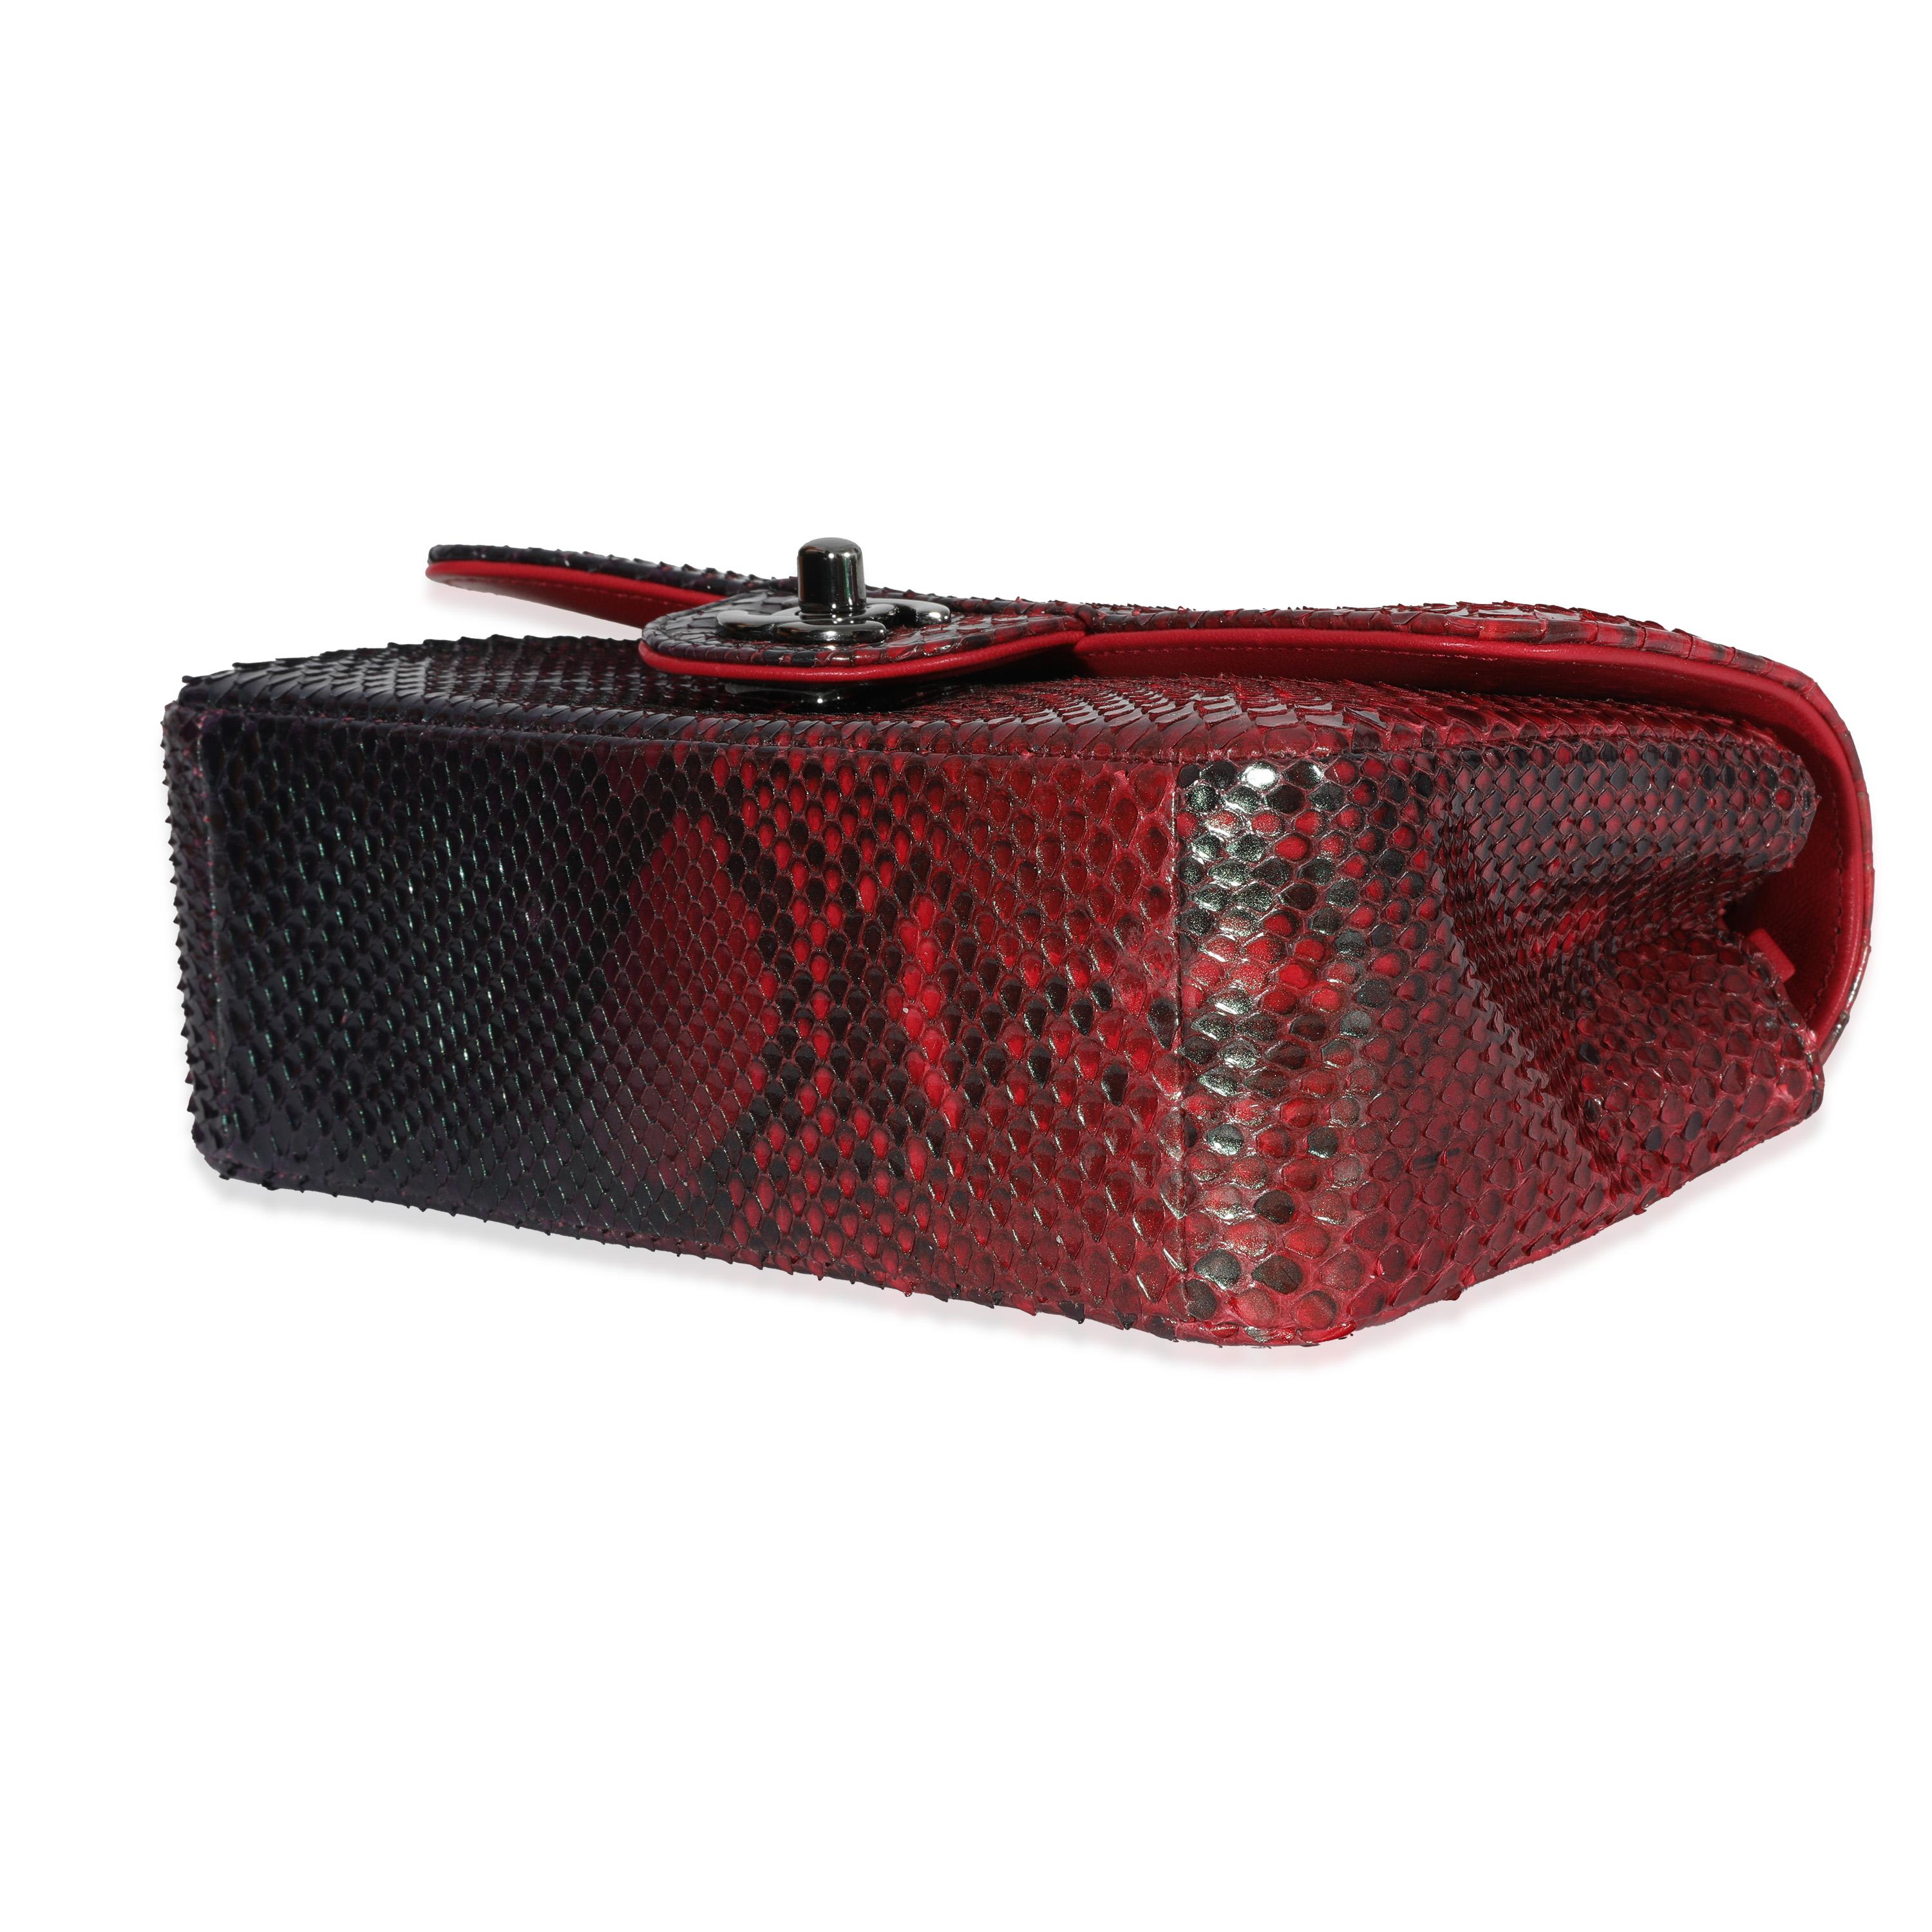 Chanel 18K Red Black Ombre Iridescent Python Mini Flap Bag RHW 1